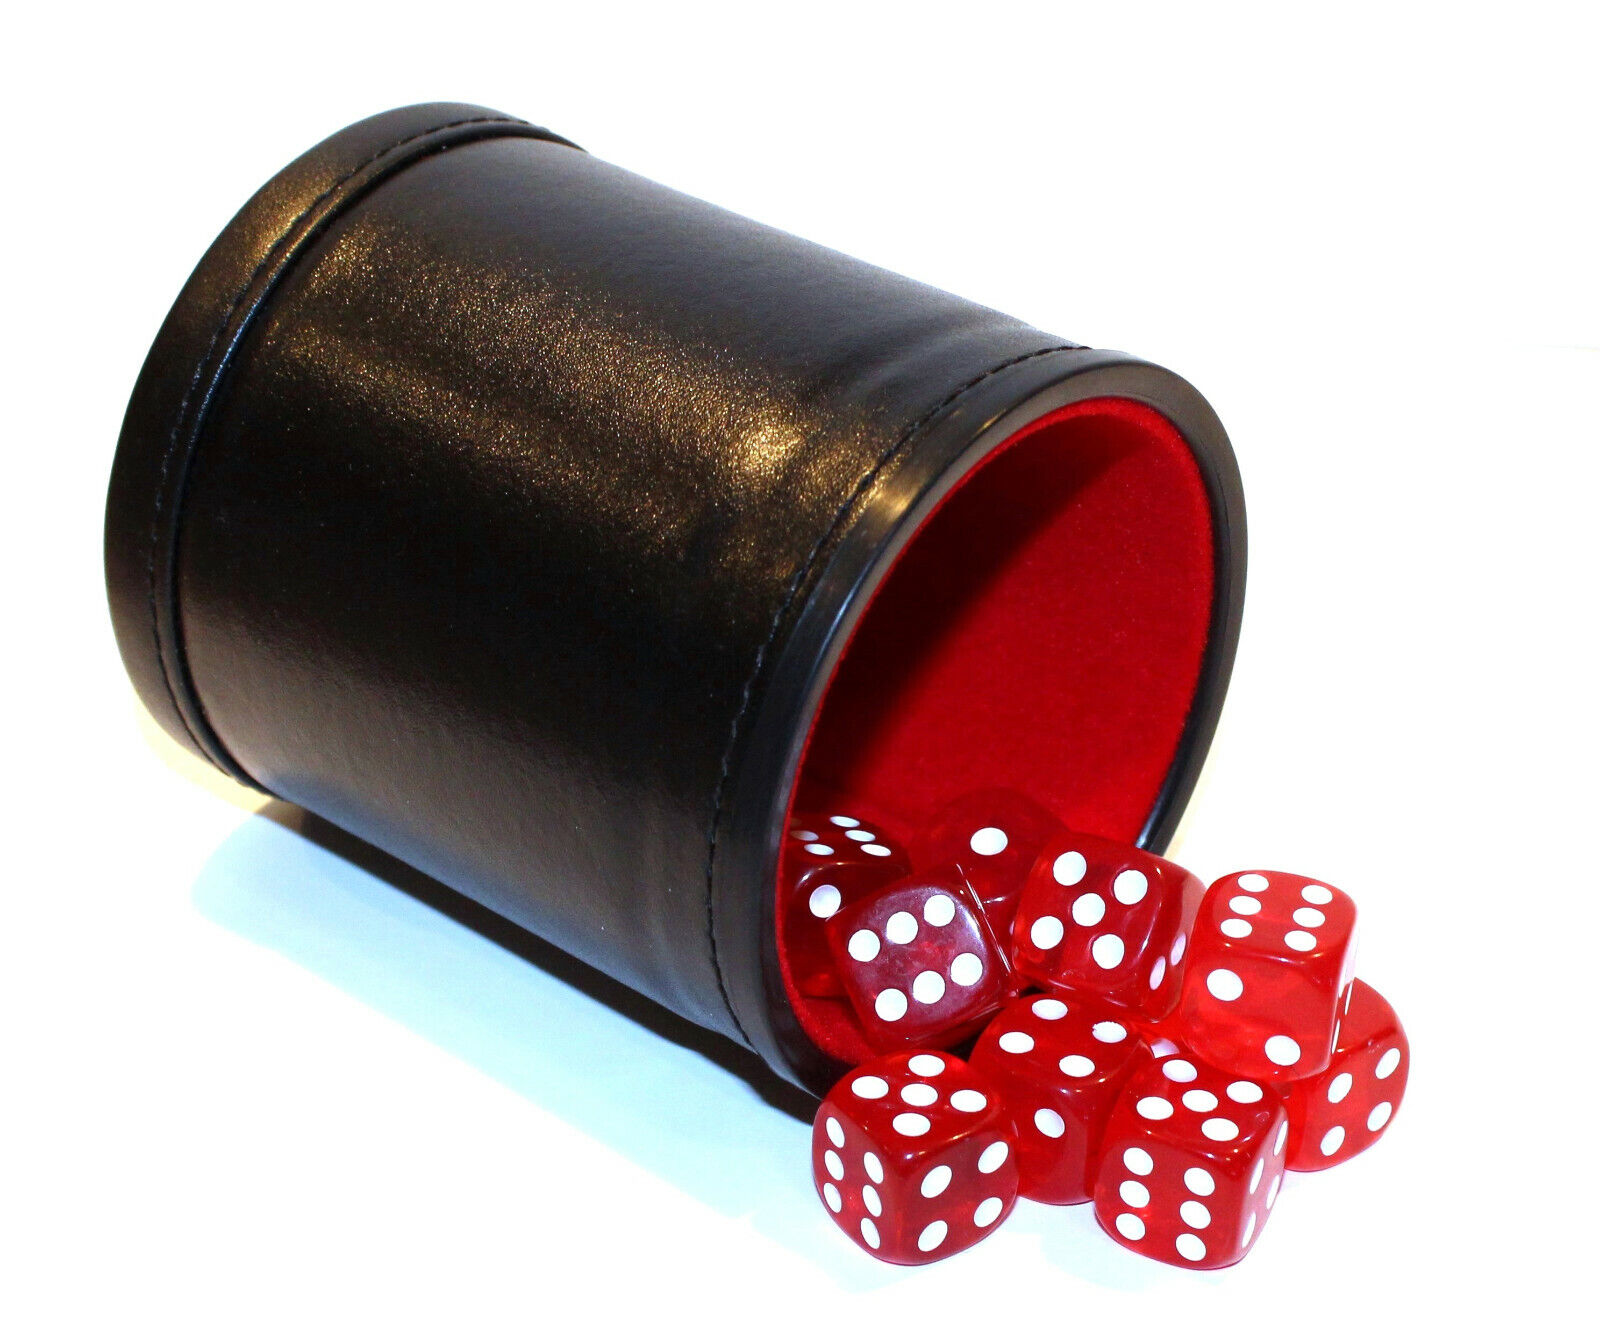 Bicast Leather Dice Cup Felt Lining & 12 Rounded Corner Game Dice - Red